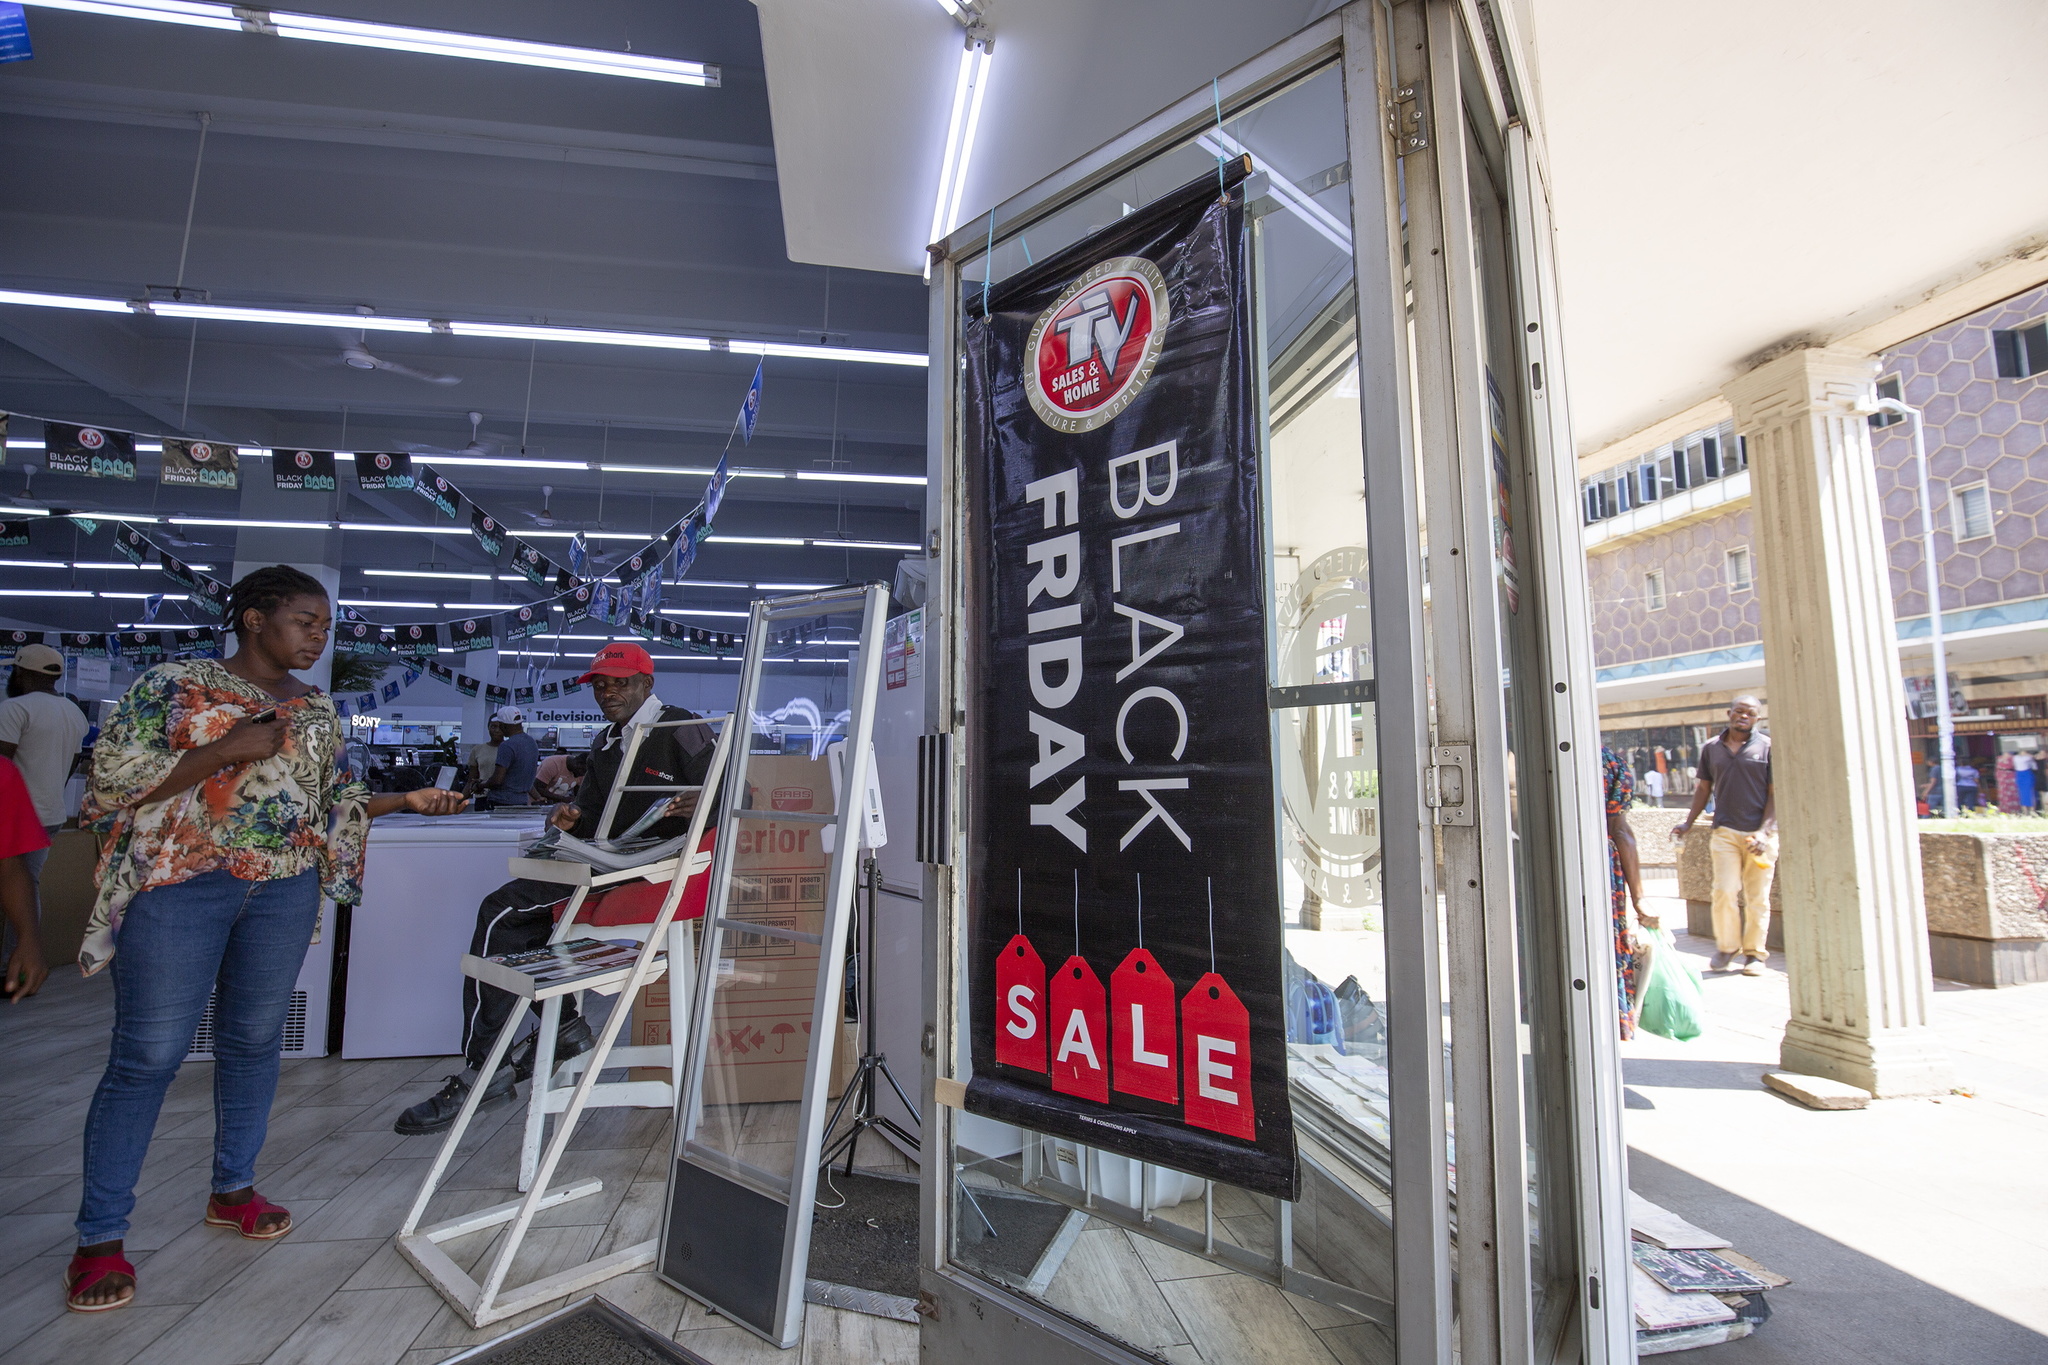 Black Friday 2023: What stores usually have the biggest sales and deals?